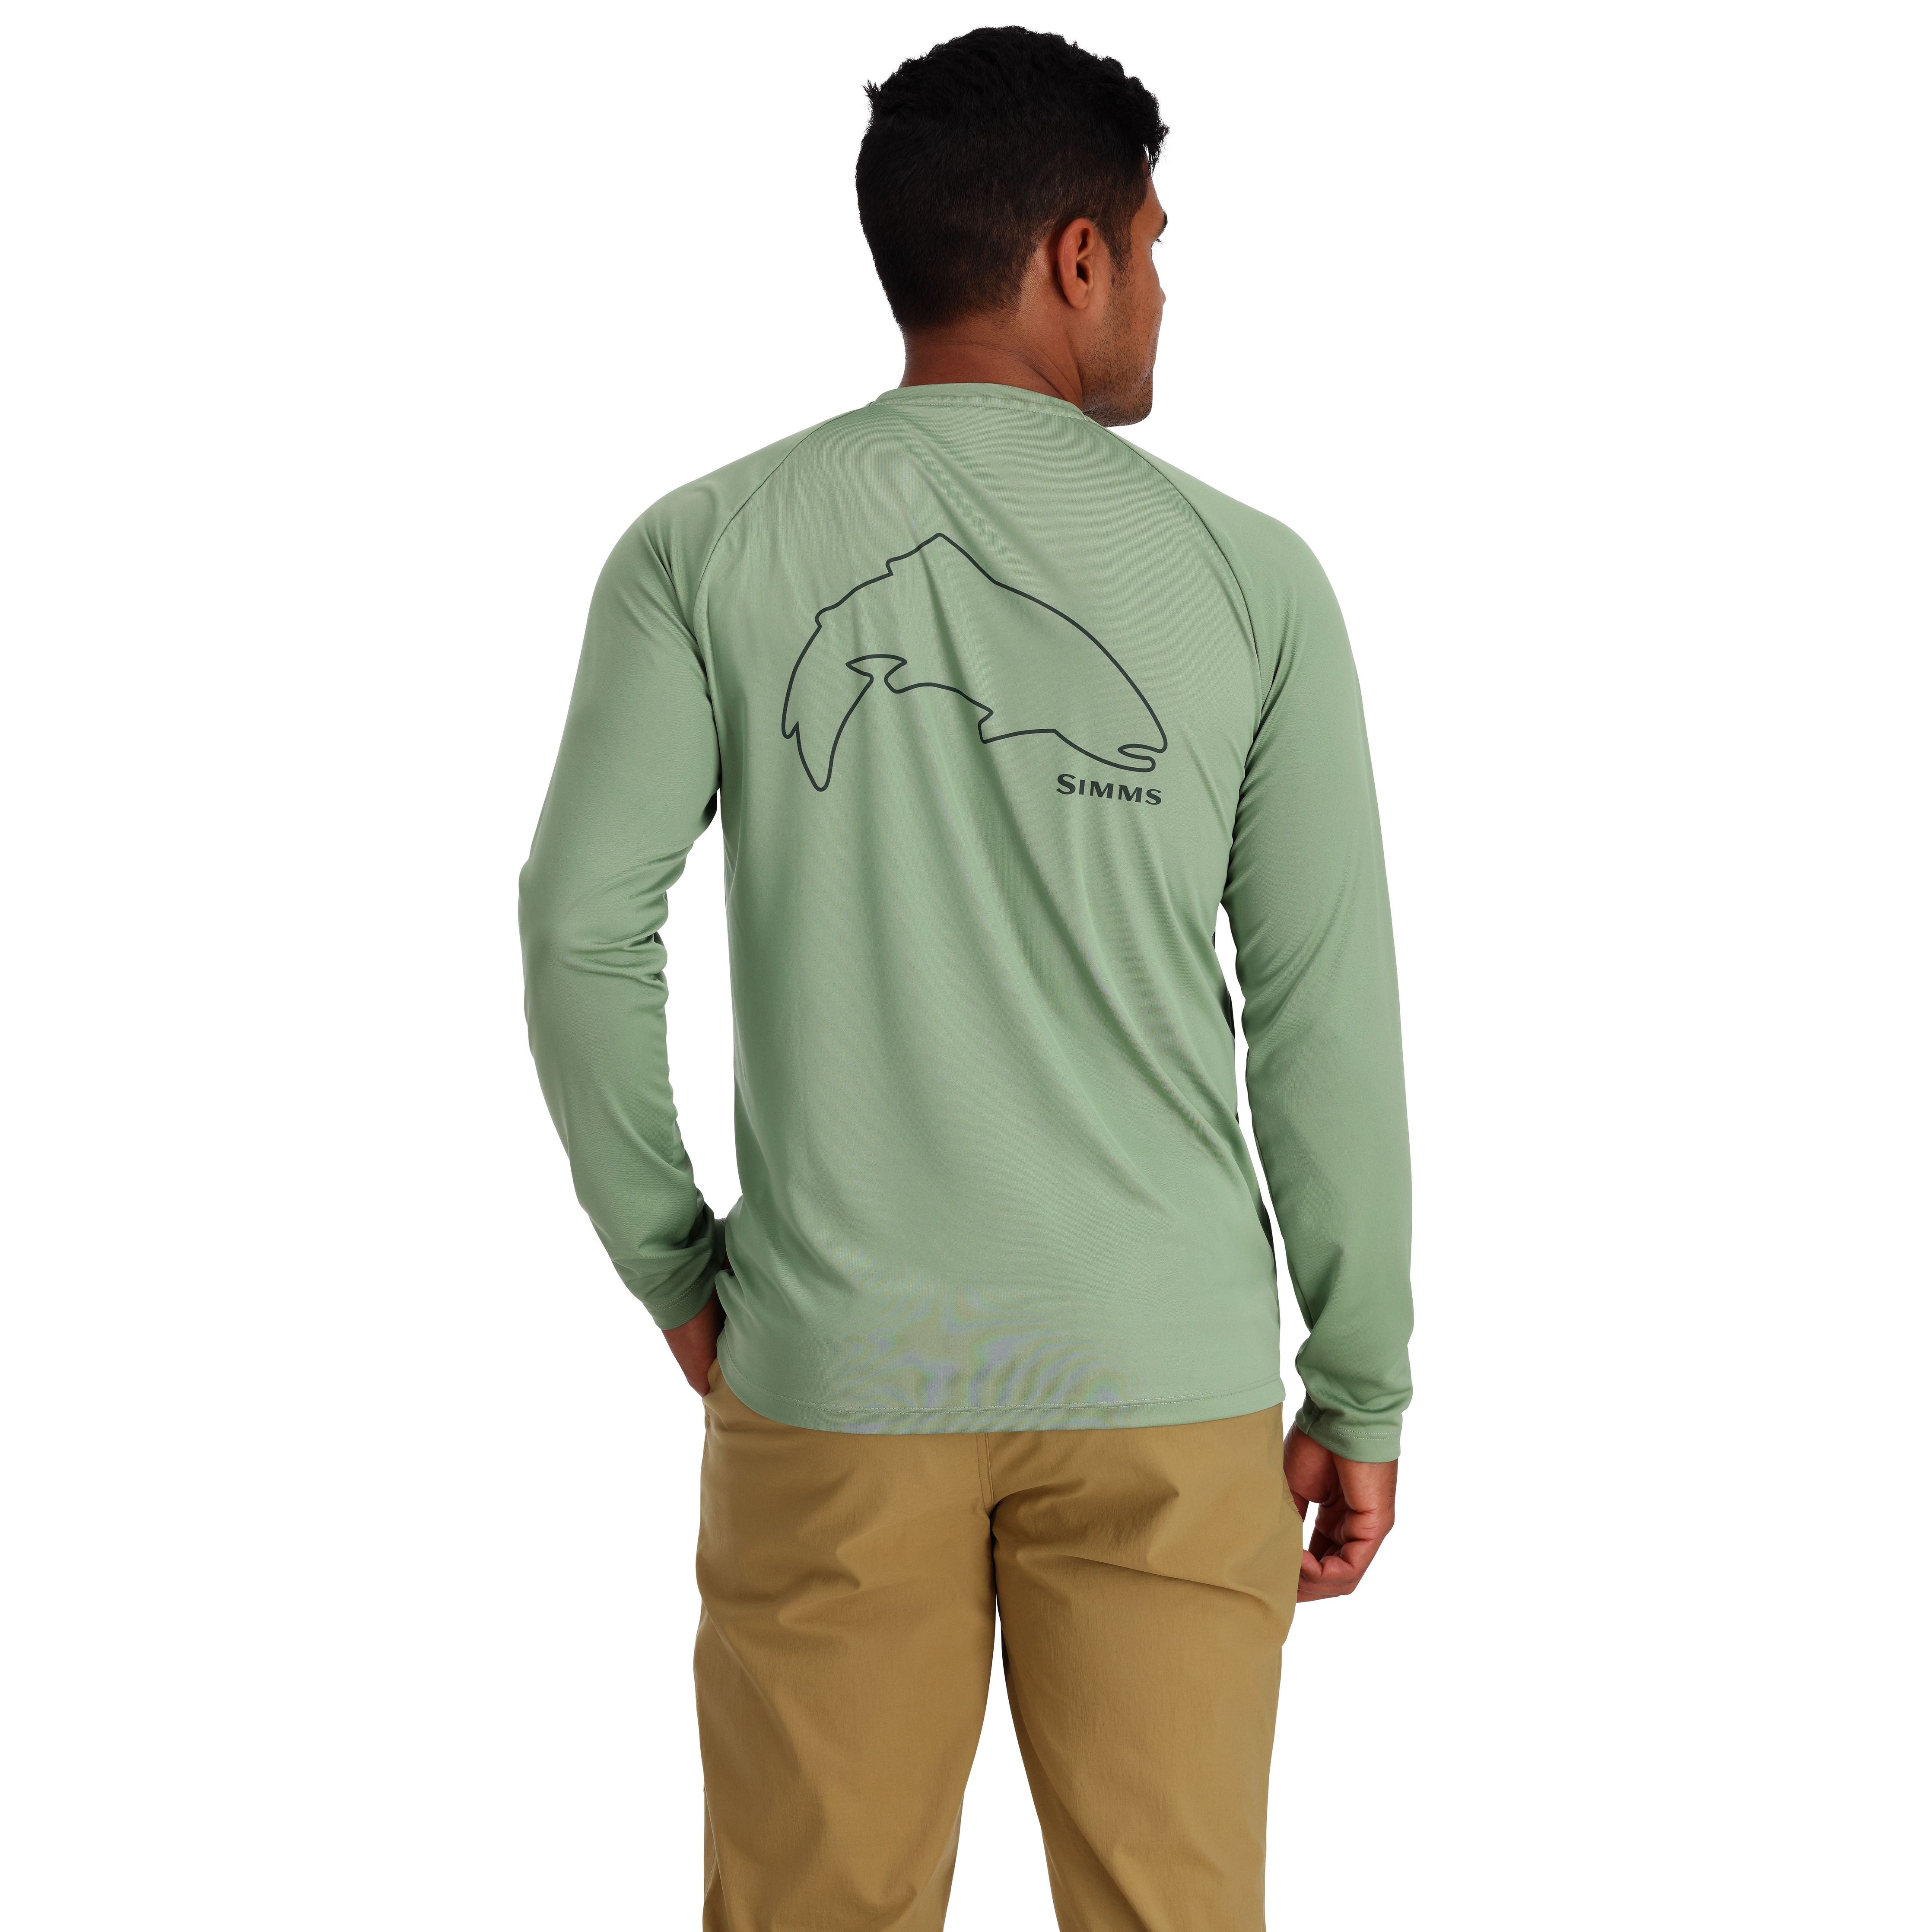 Simms Tech Tee - Artist Series Trout Outline/Field Image 04